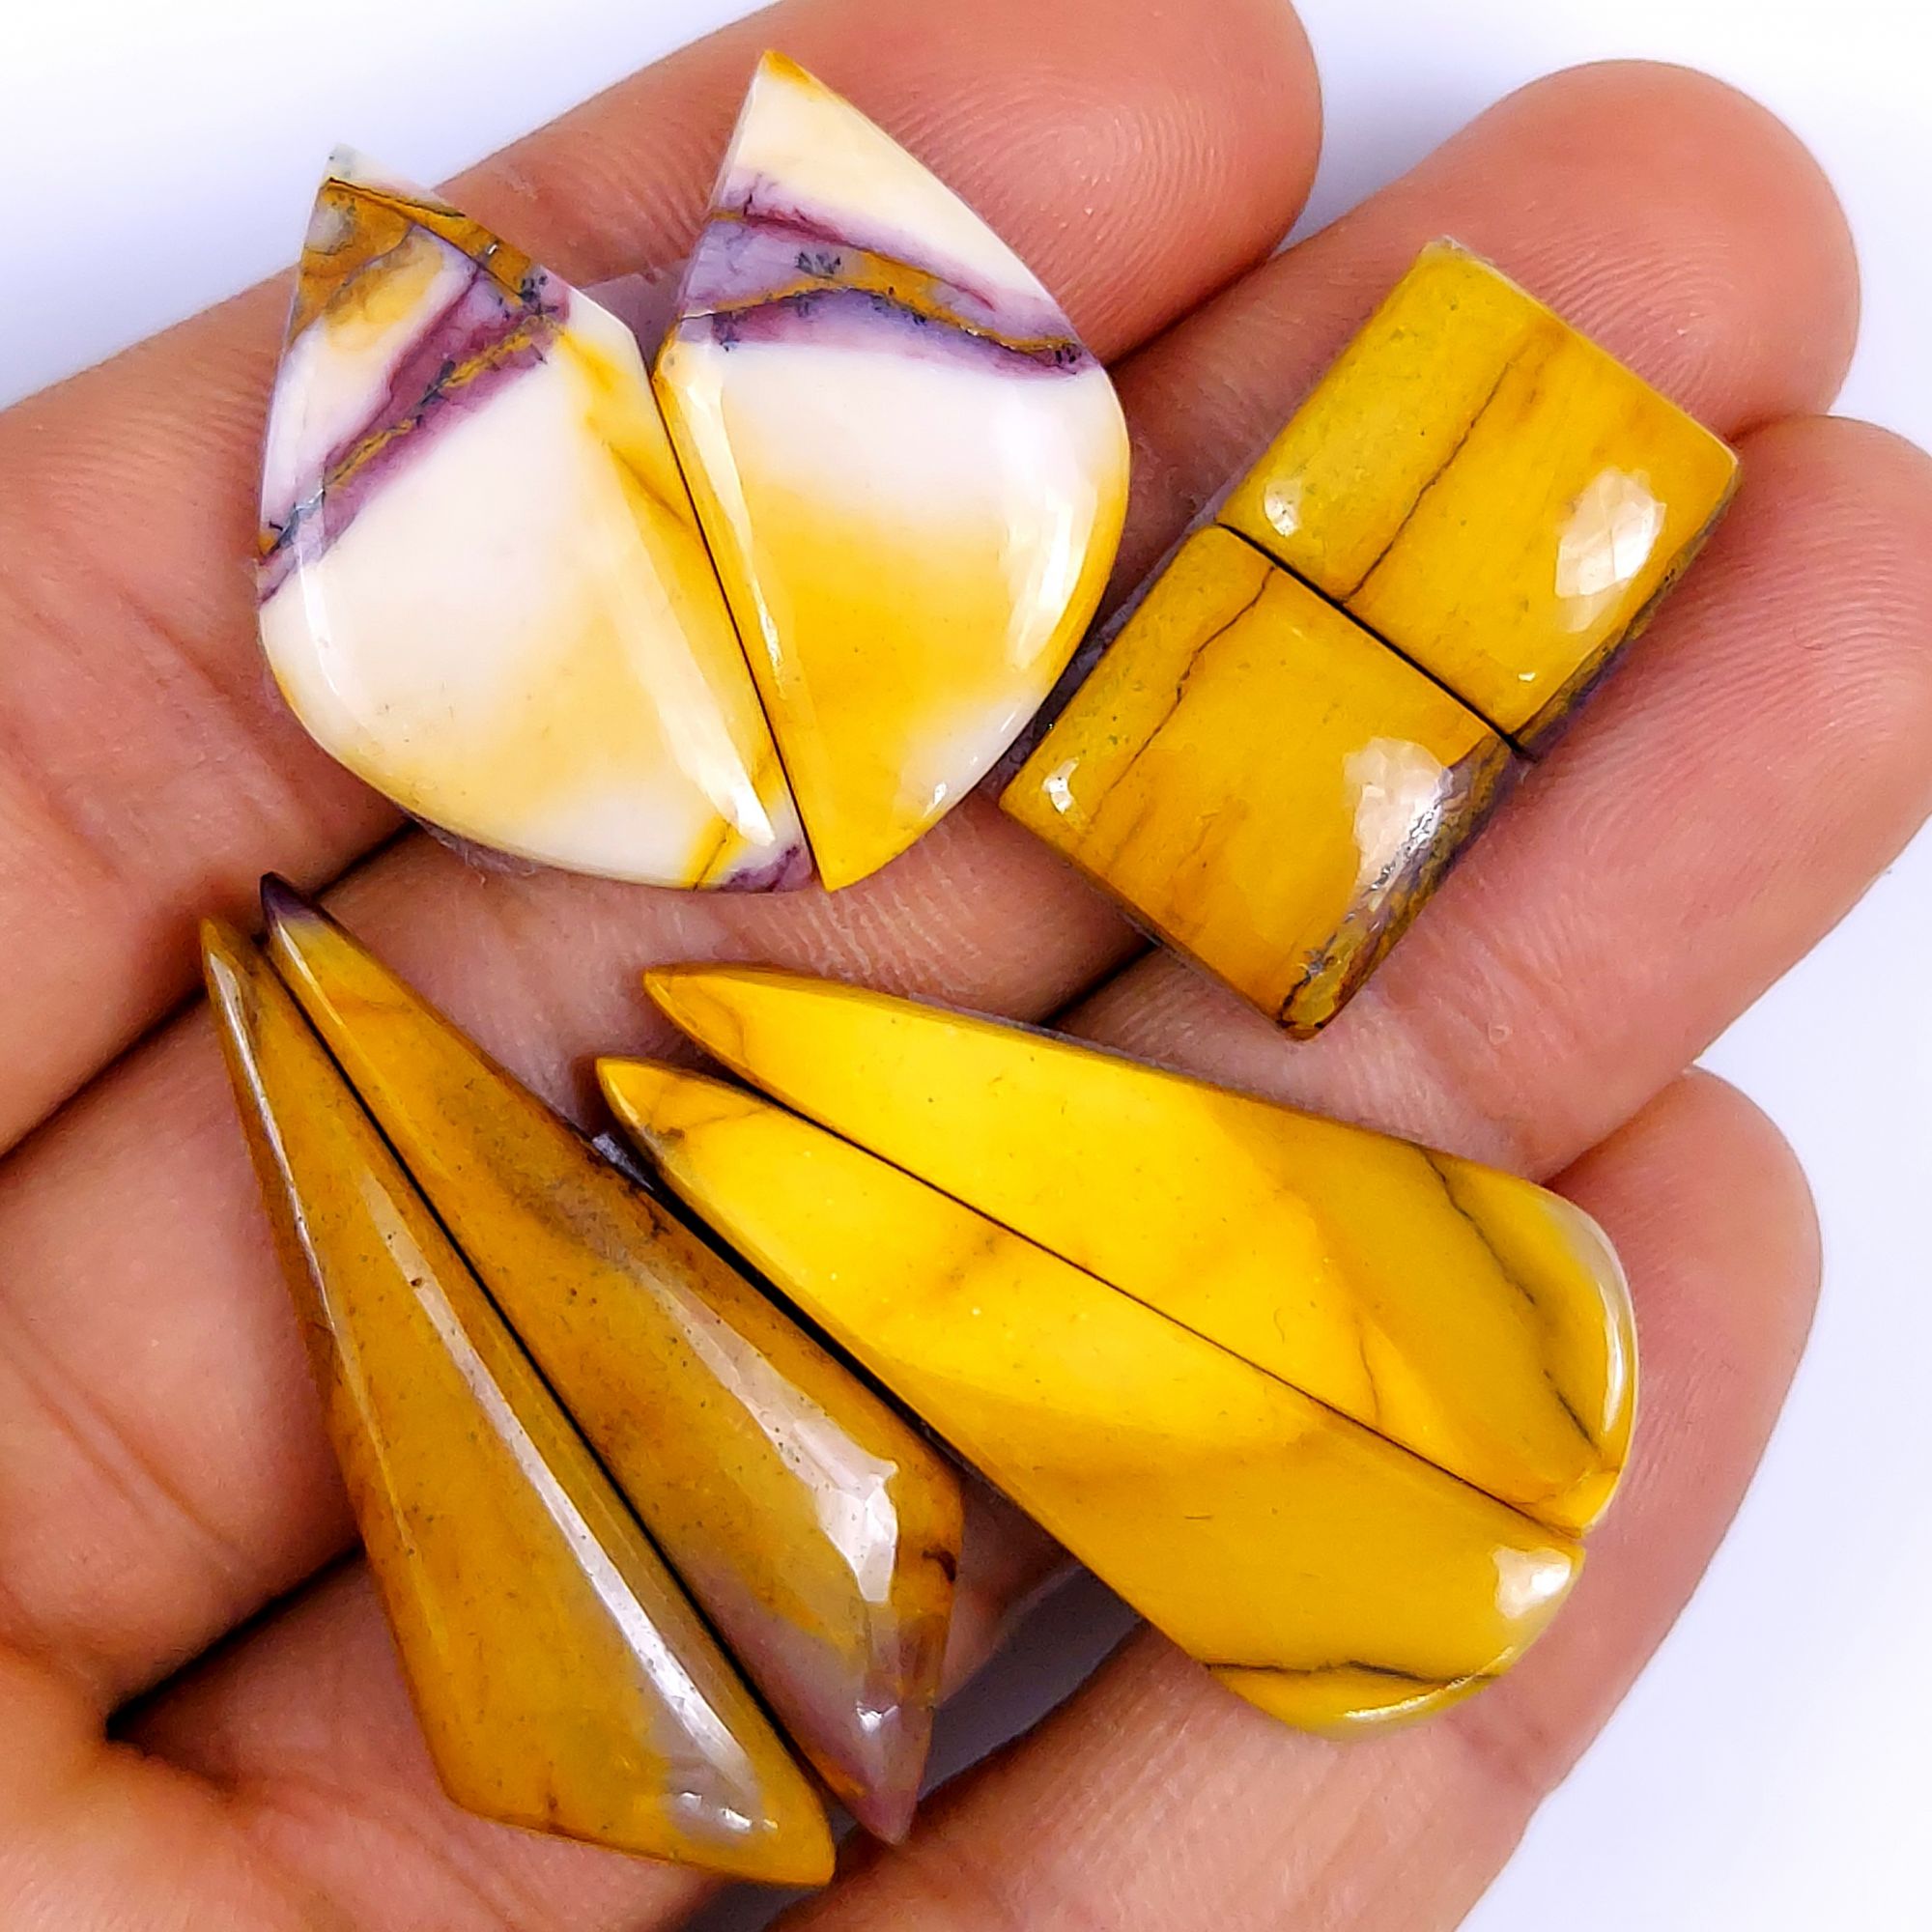 4 Pair 69Cts Natural Mookaite Jasper Loose Cabochon Gemstone Earring Pair For Jewelry Making Gemstone Mix Size & Shape Lot 38x9 14x12mm #5707